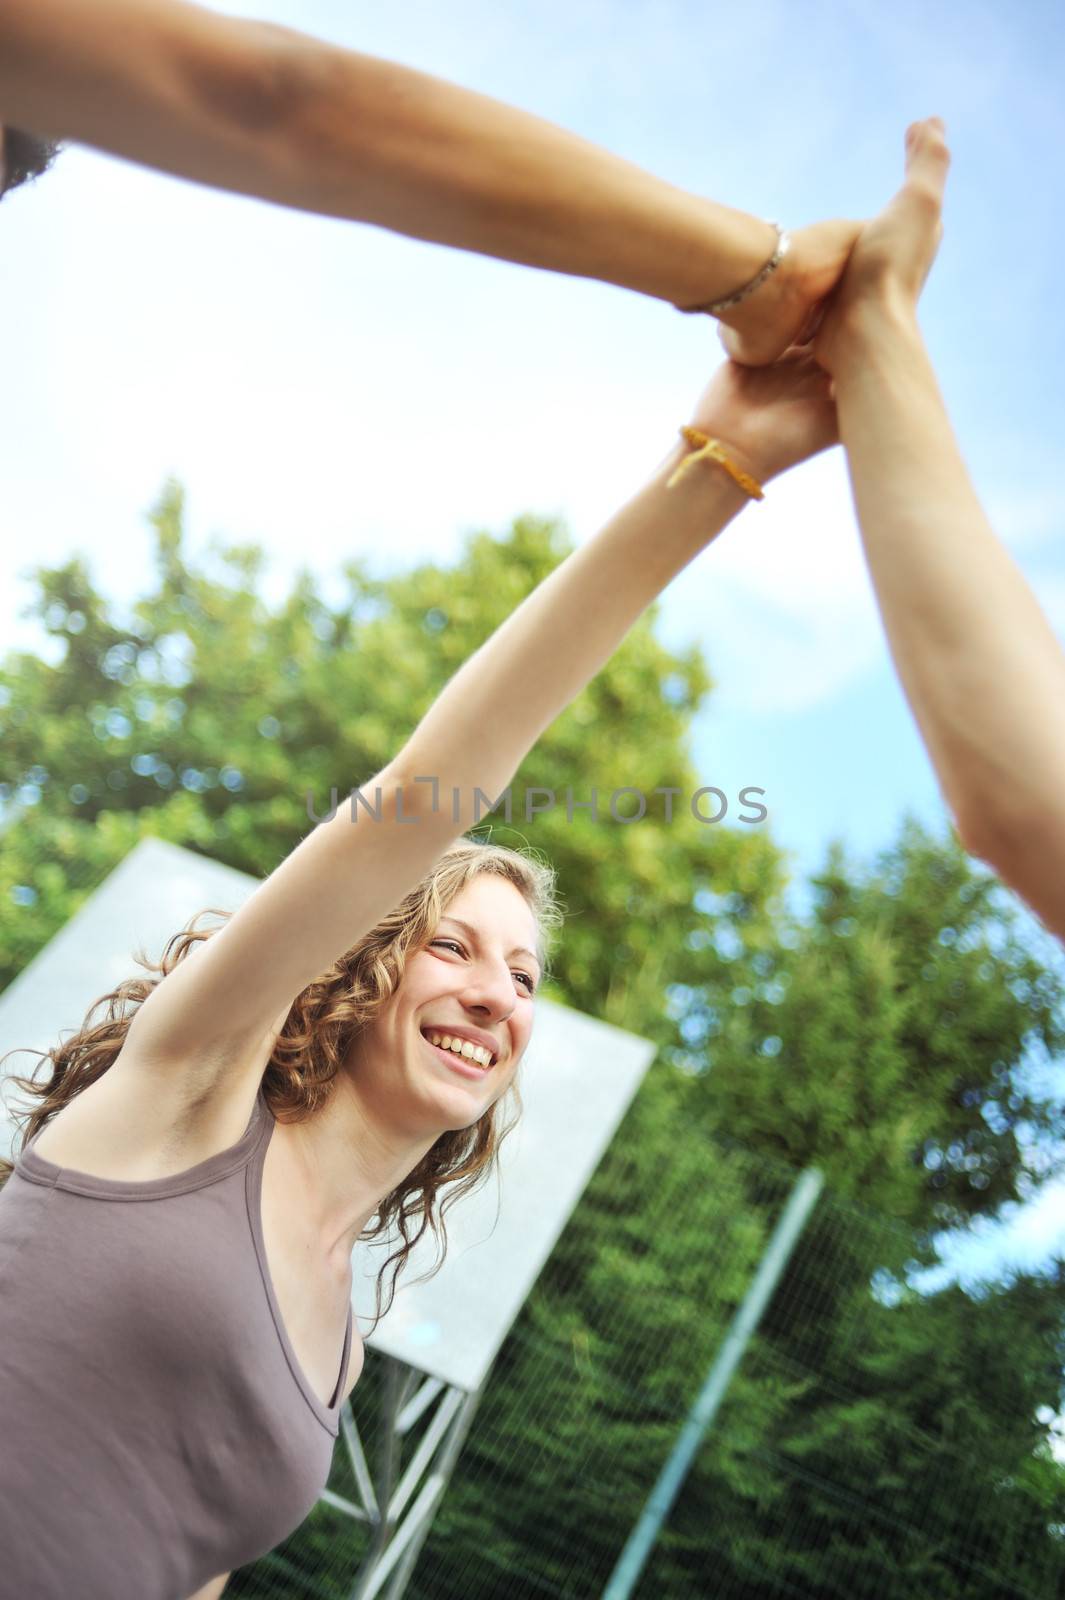 Three teenagers giving a high five, hands close up